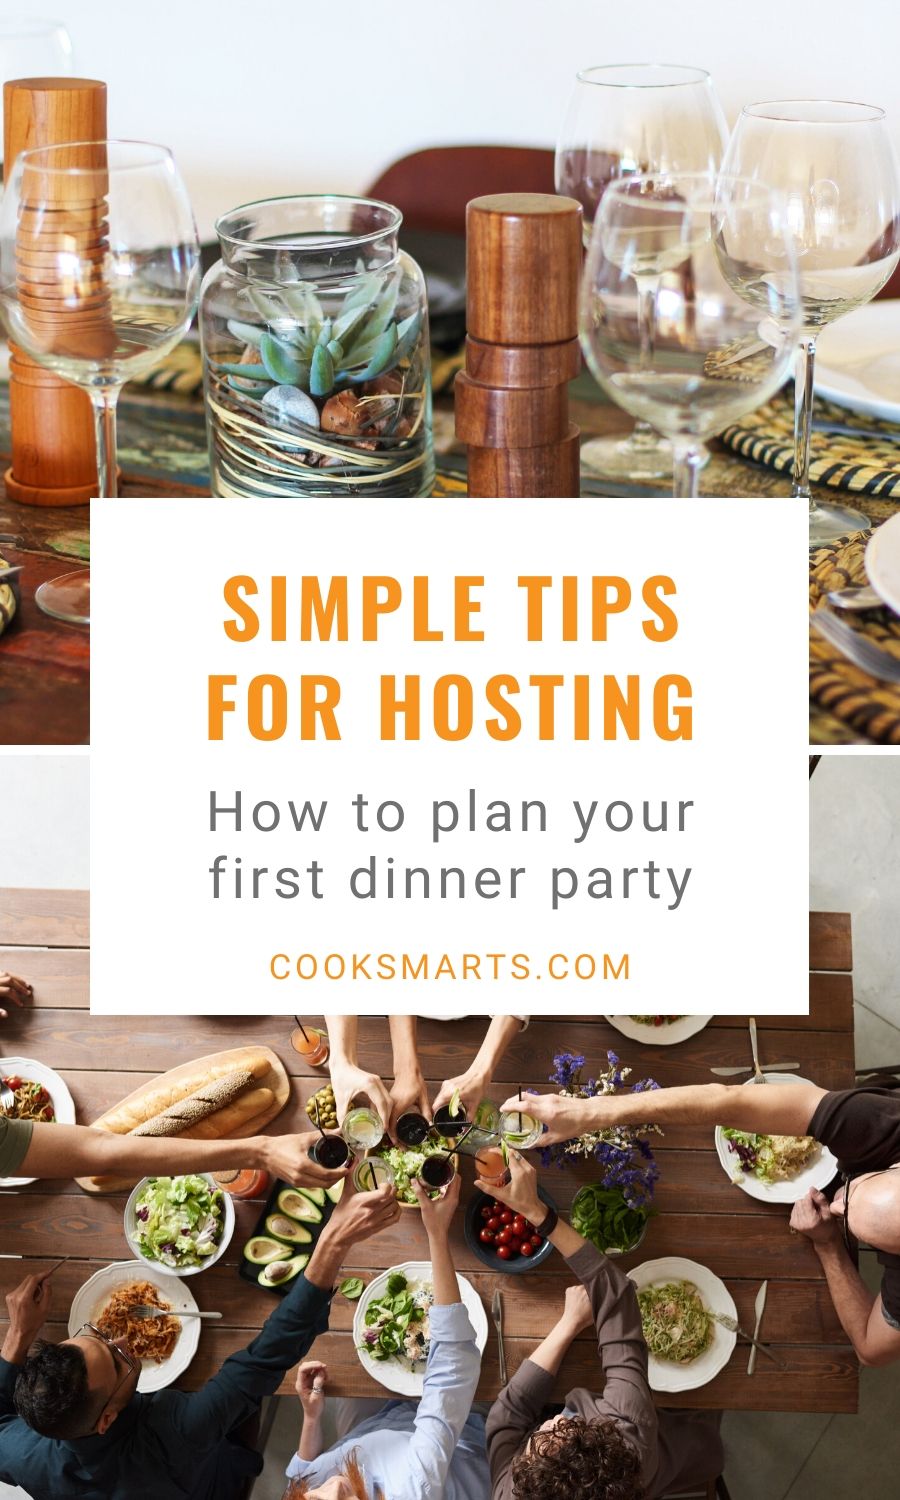 Dinner Party Tips with Anna Watson Carl | In the Kitchen with Cook Smarts Podcast